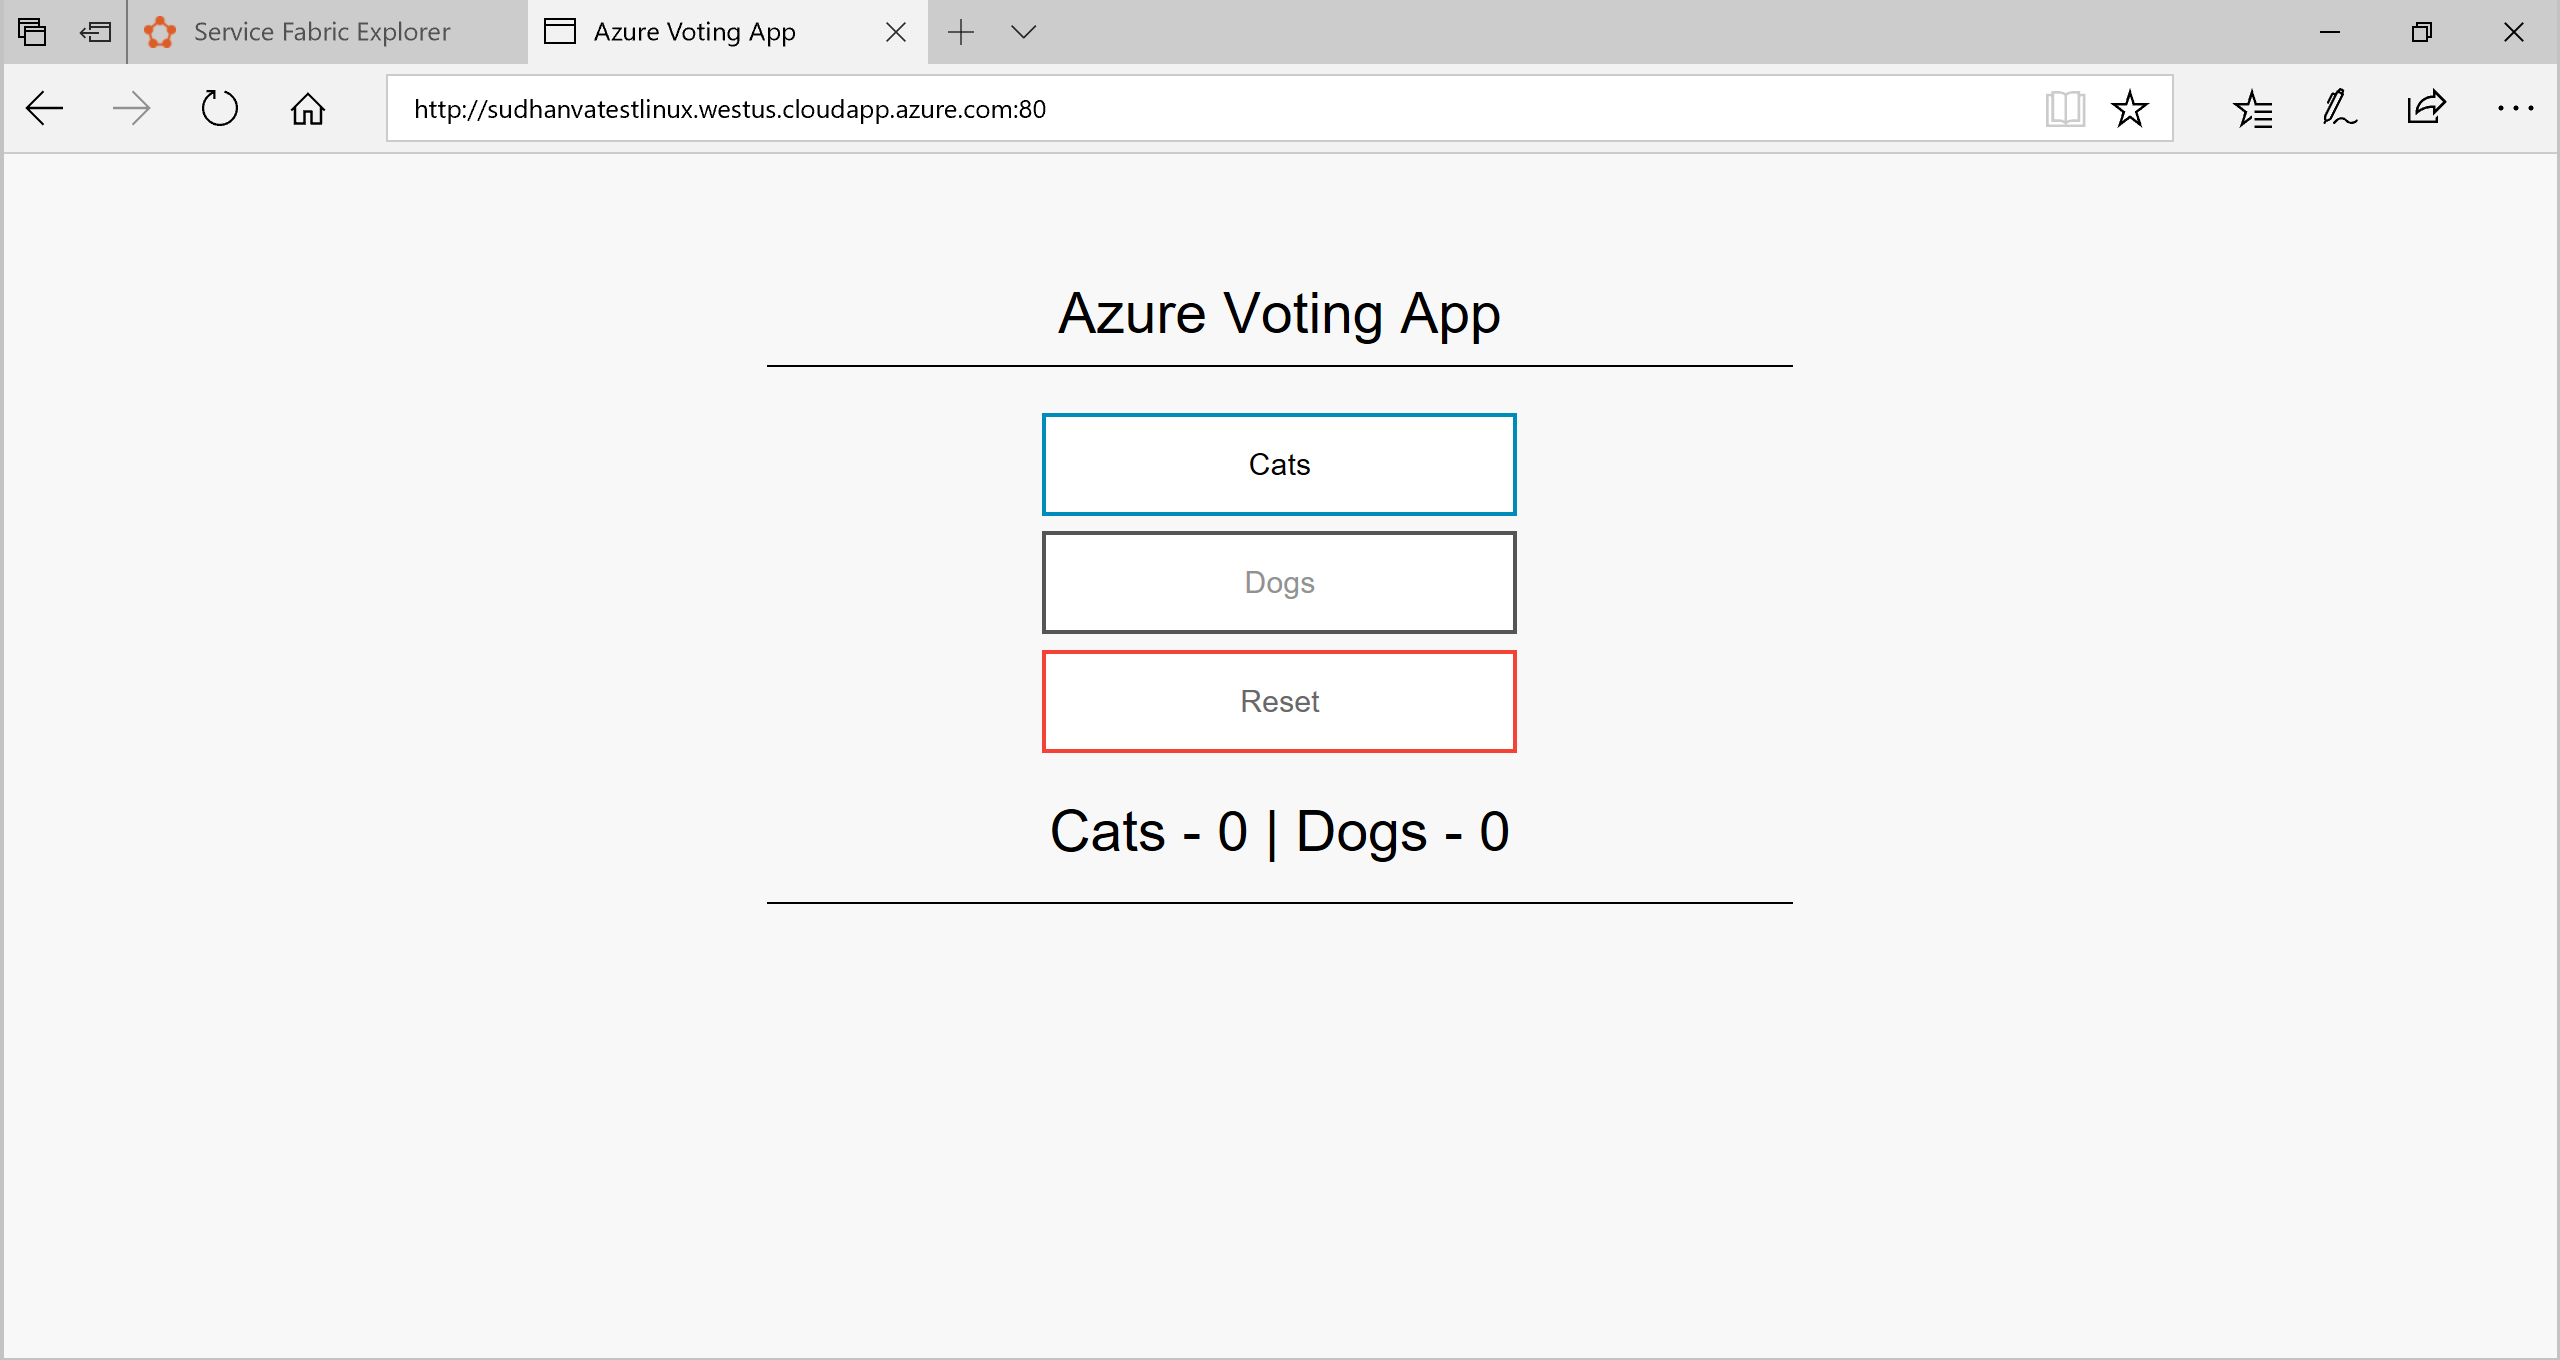 Screenshot shows the Azure Voting App with buttons for Cats, Dogs, and Reset, and totals.